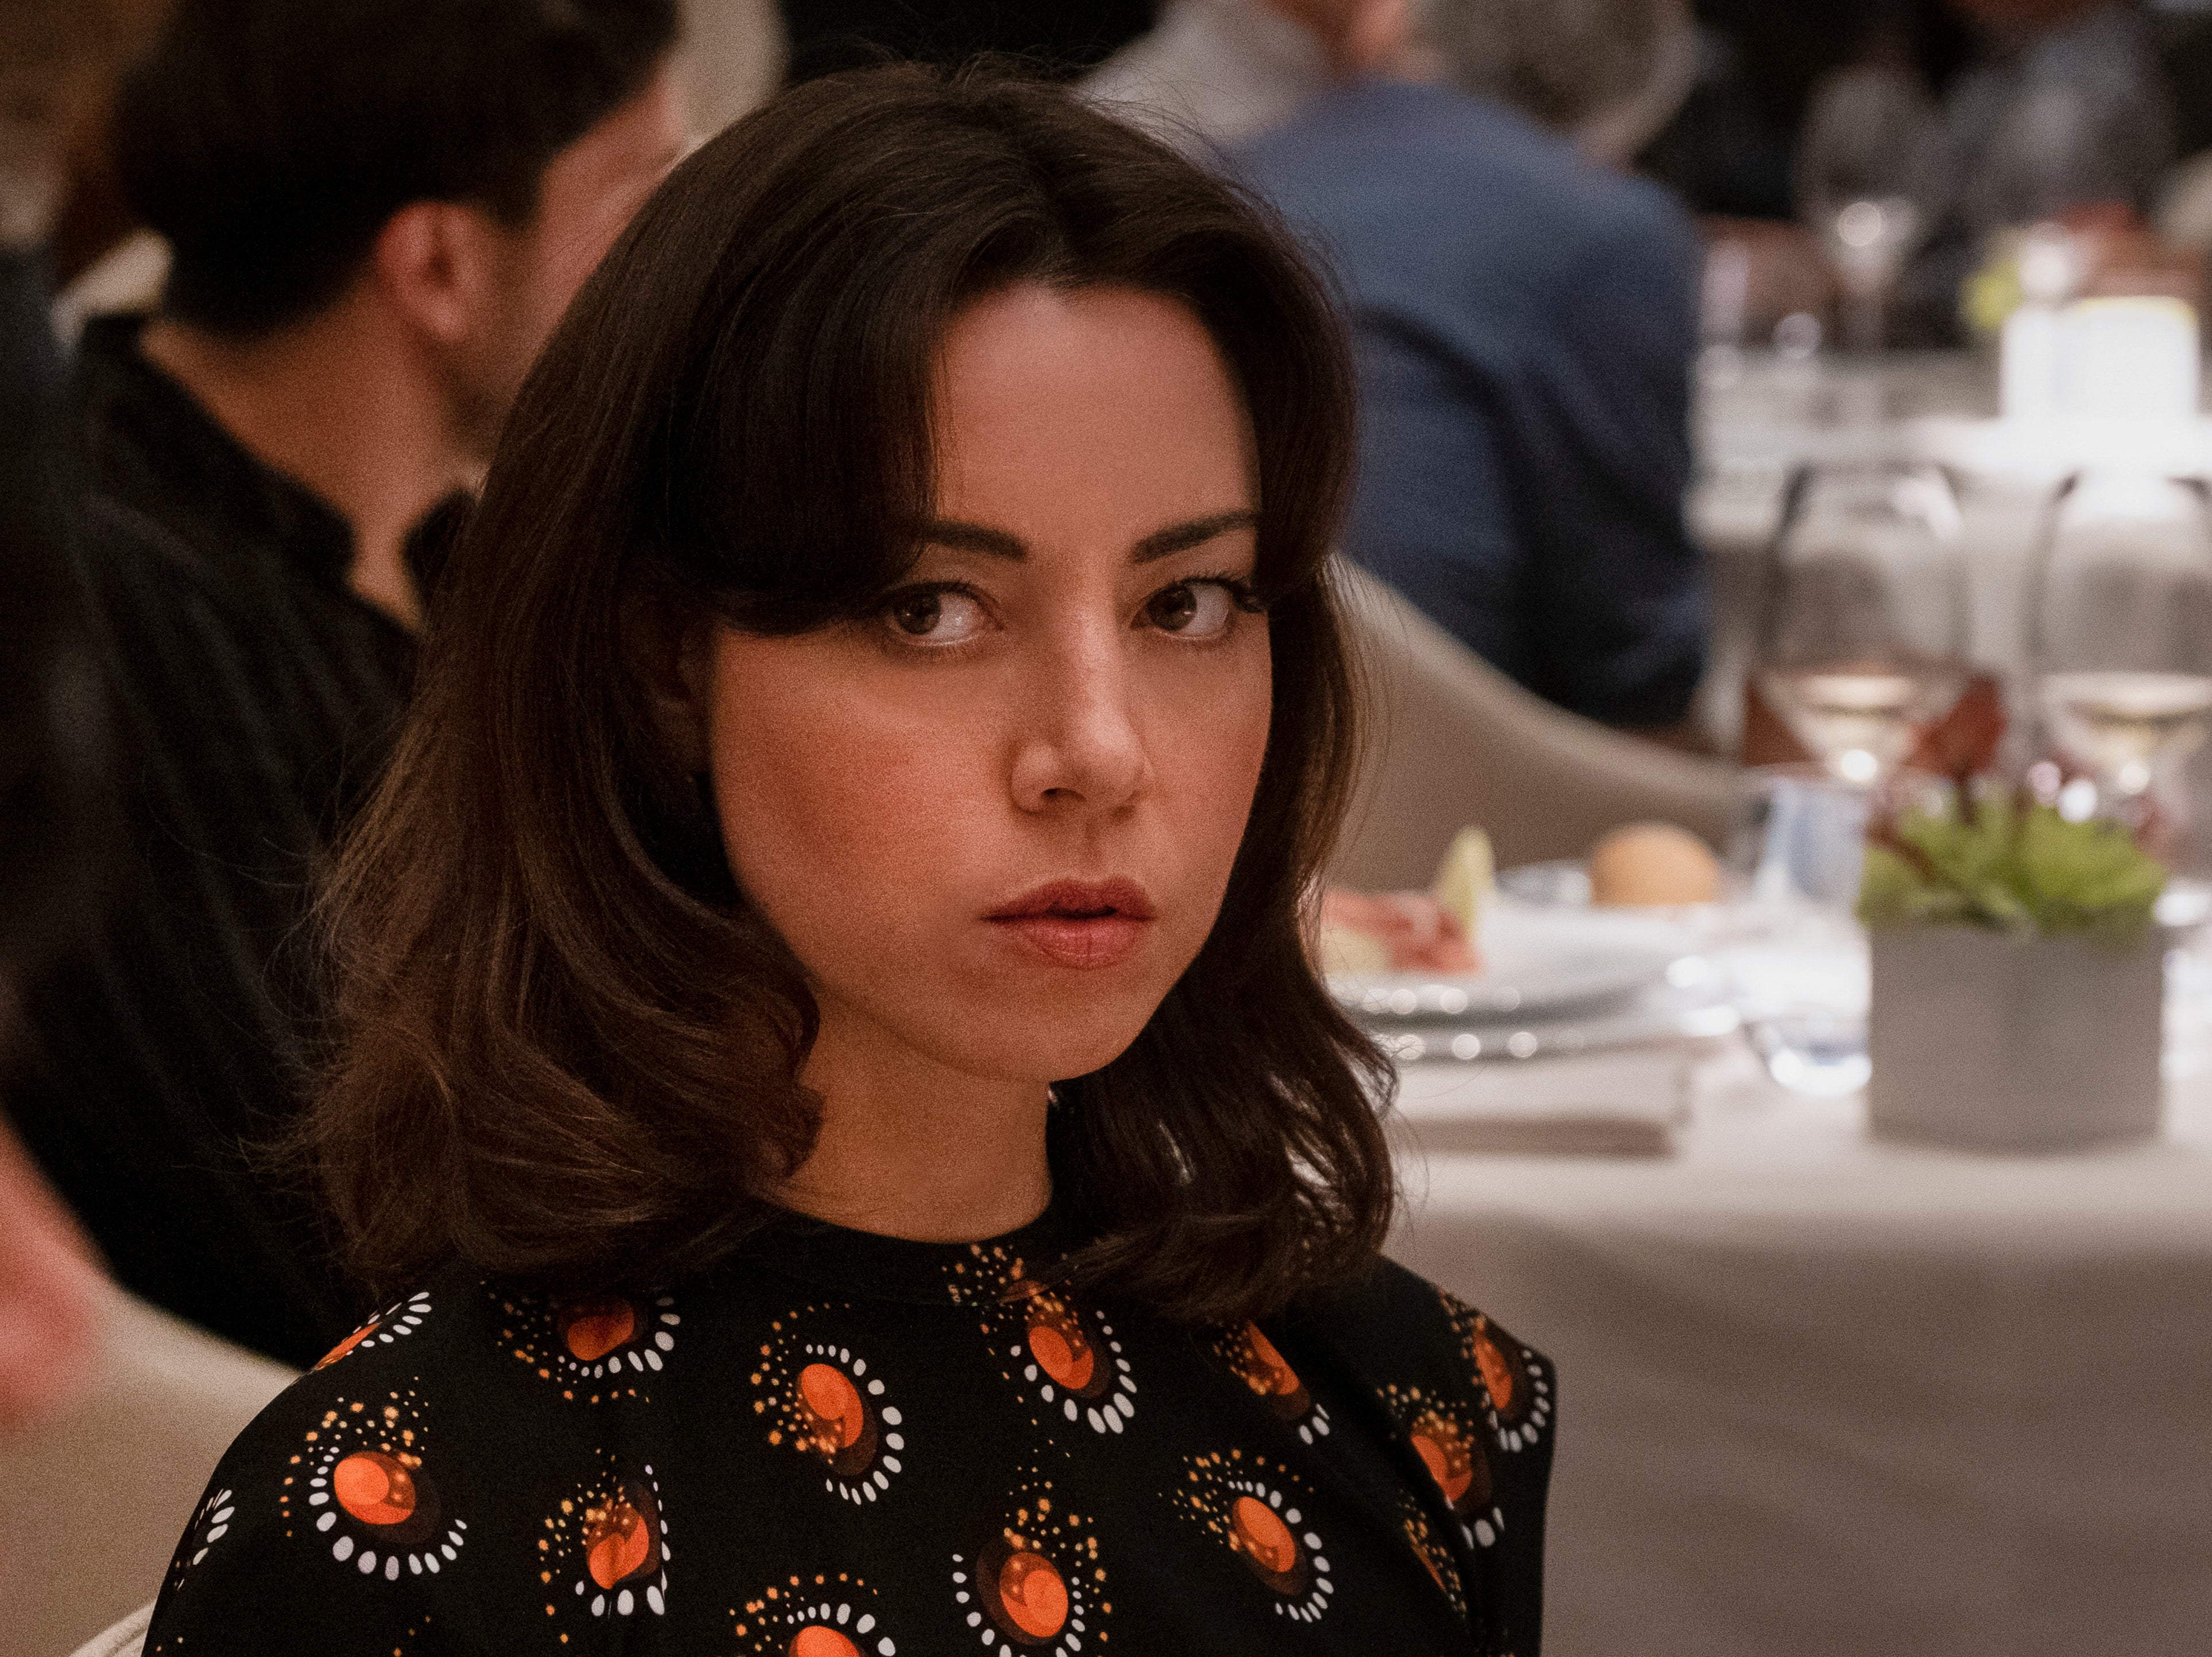 All hail Aubrey Plaza, the exquisite ice queen of The White Lotus